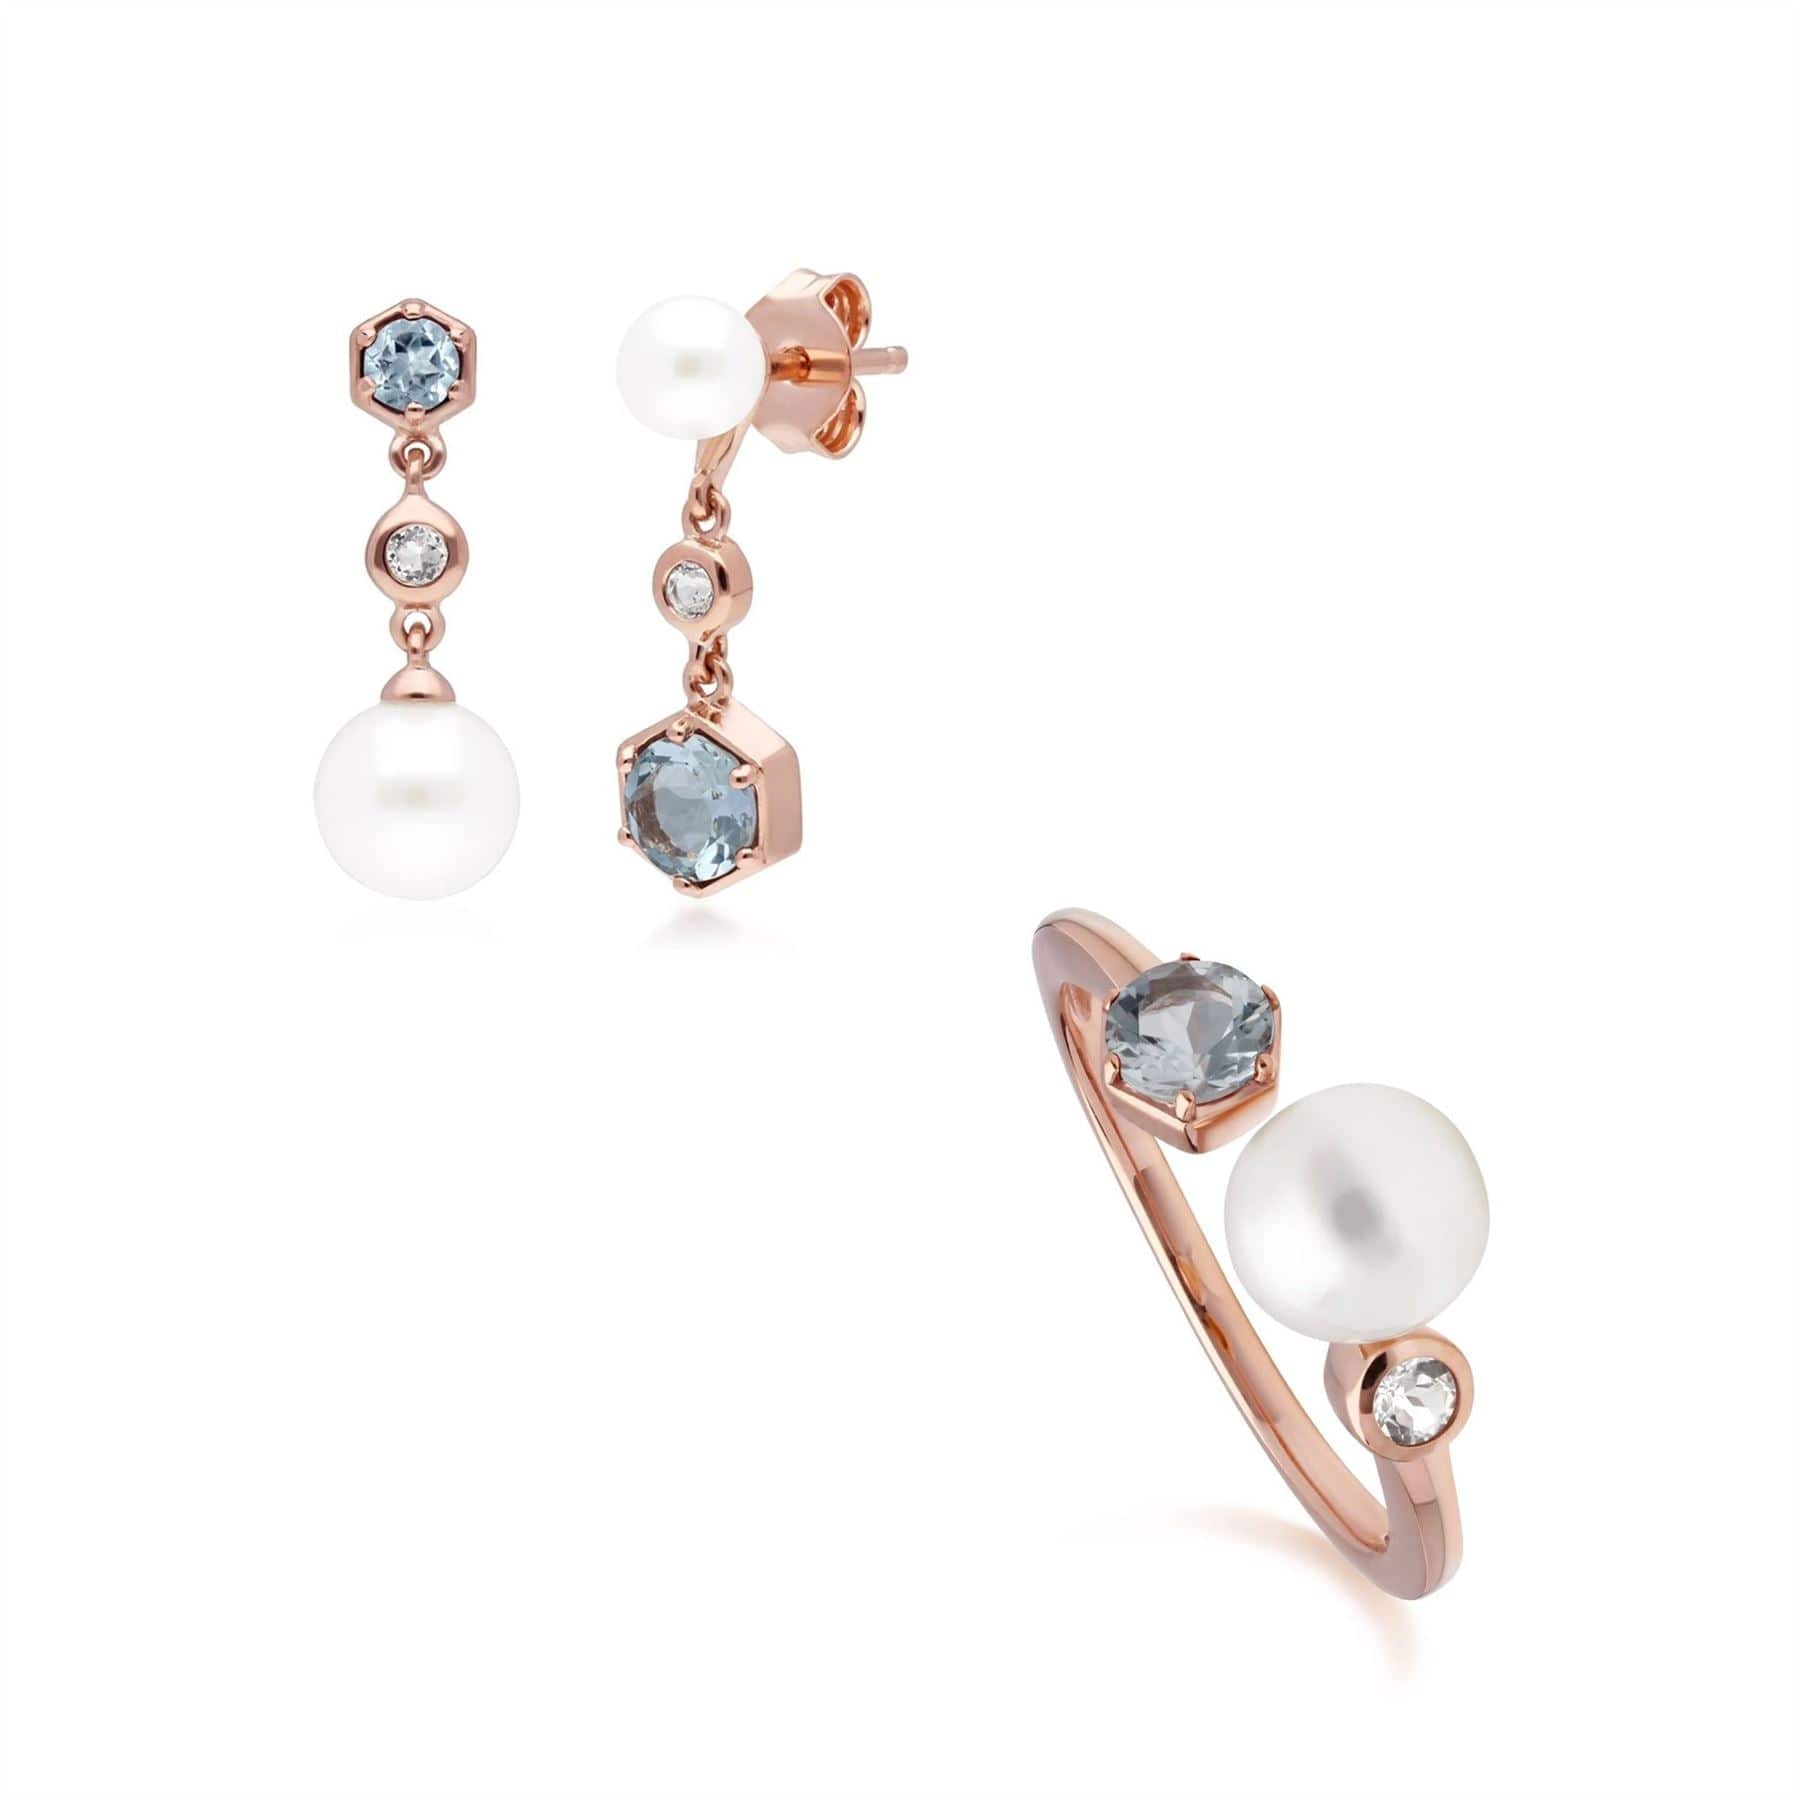 Image of Modern Pearl, Aquamarine & Topaz Earring & Ring Set in Rose Gold Plated Silver